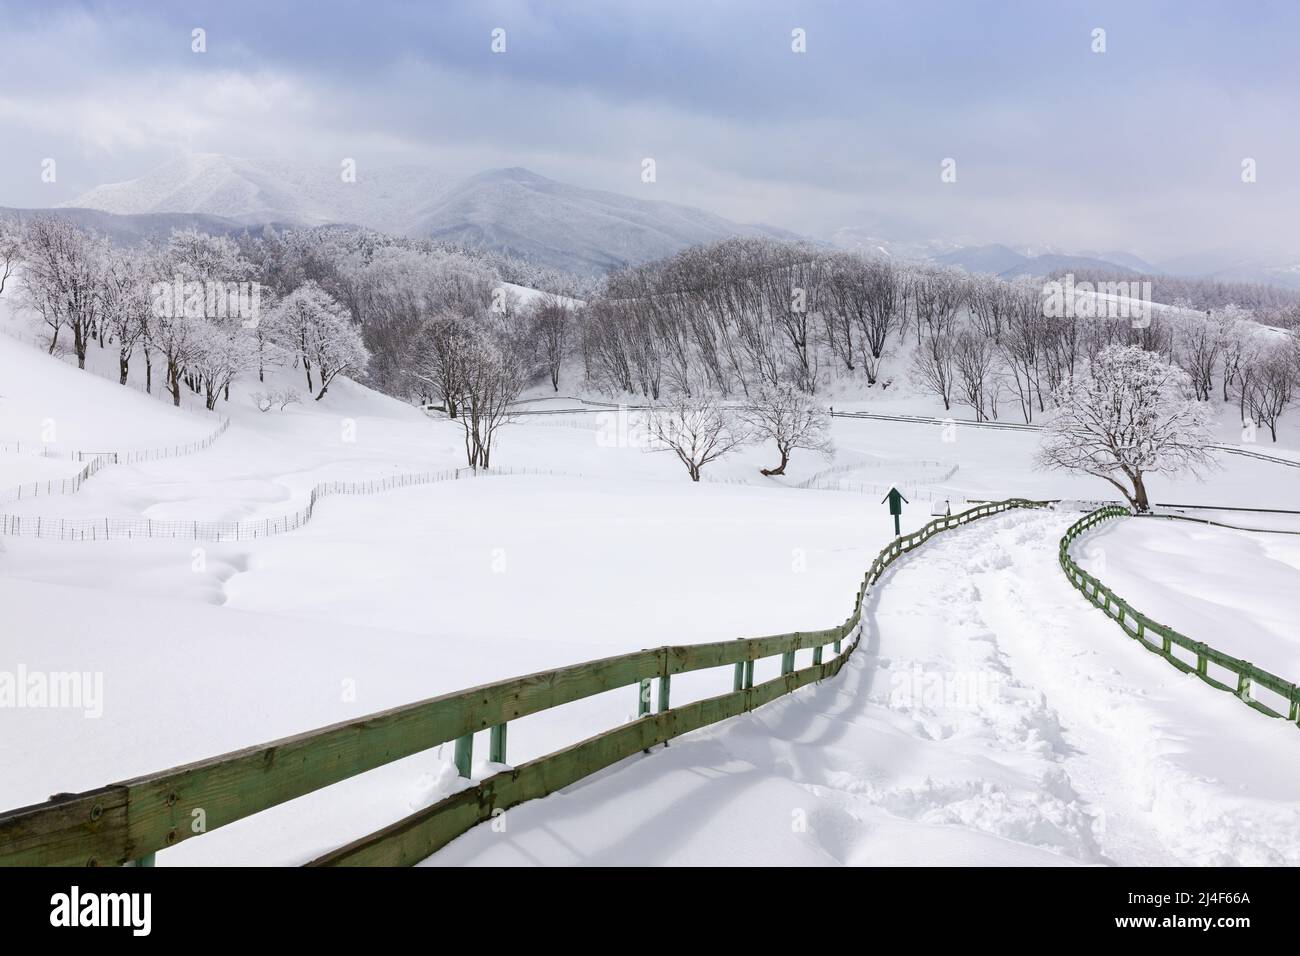 Beautiful winter mountain snow scene, snow-covered road and wooden fence (Daegwallyeong, Gangwon-do, South Korea) Stock Photo